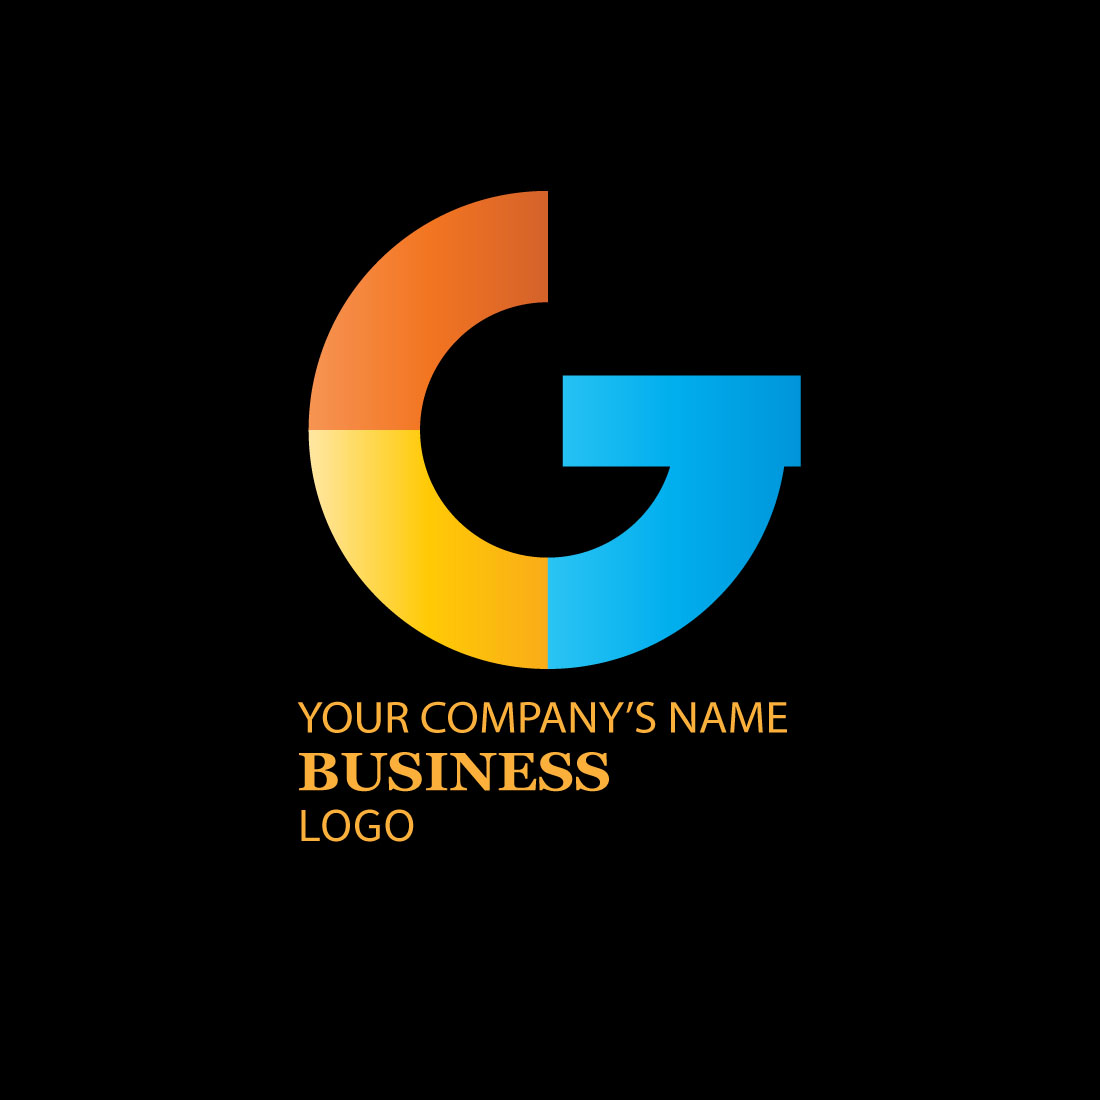 Image of a G-shaped logo with a great design